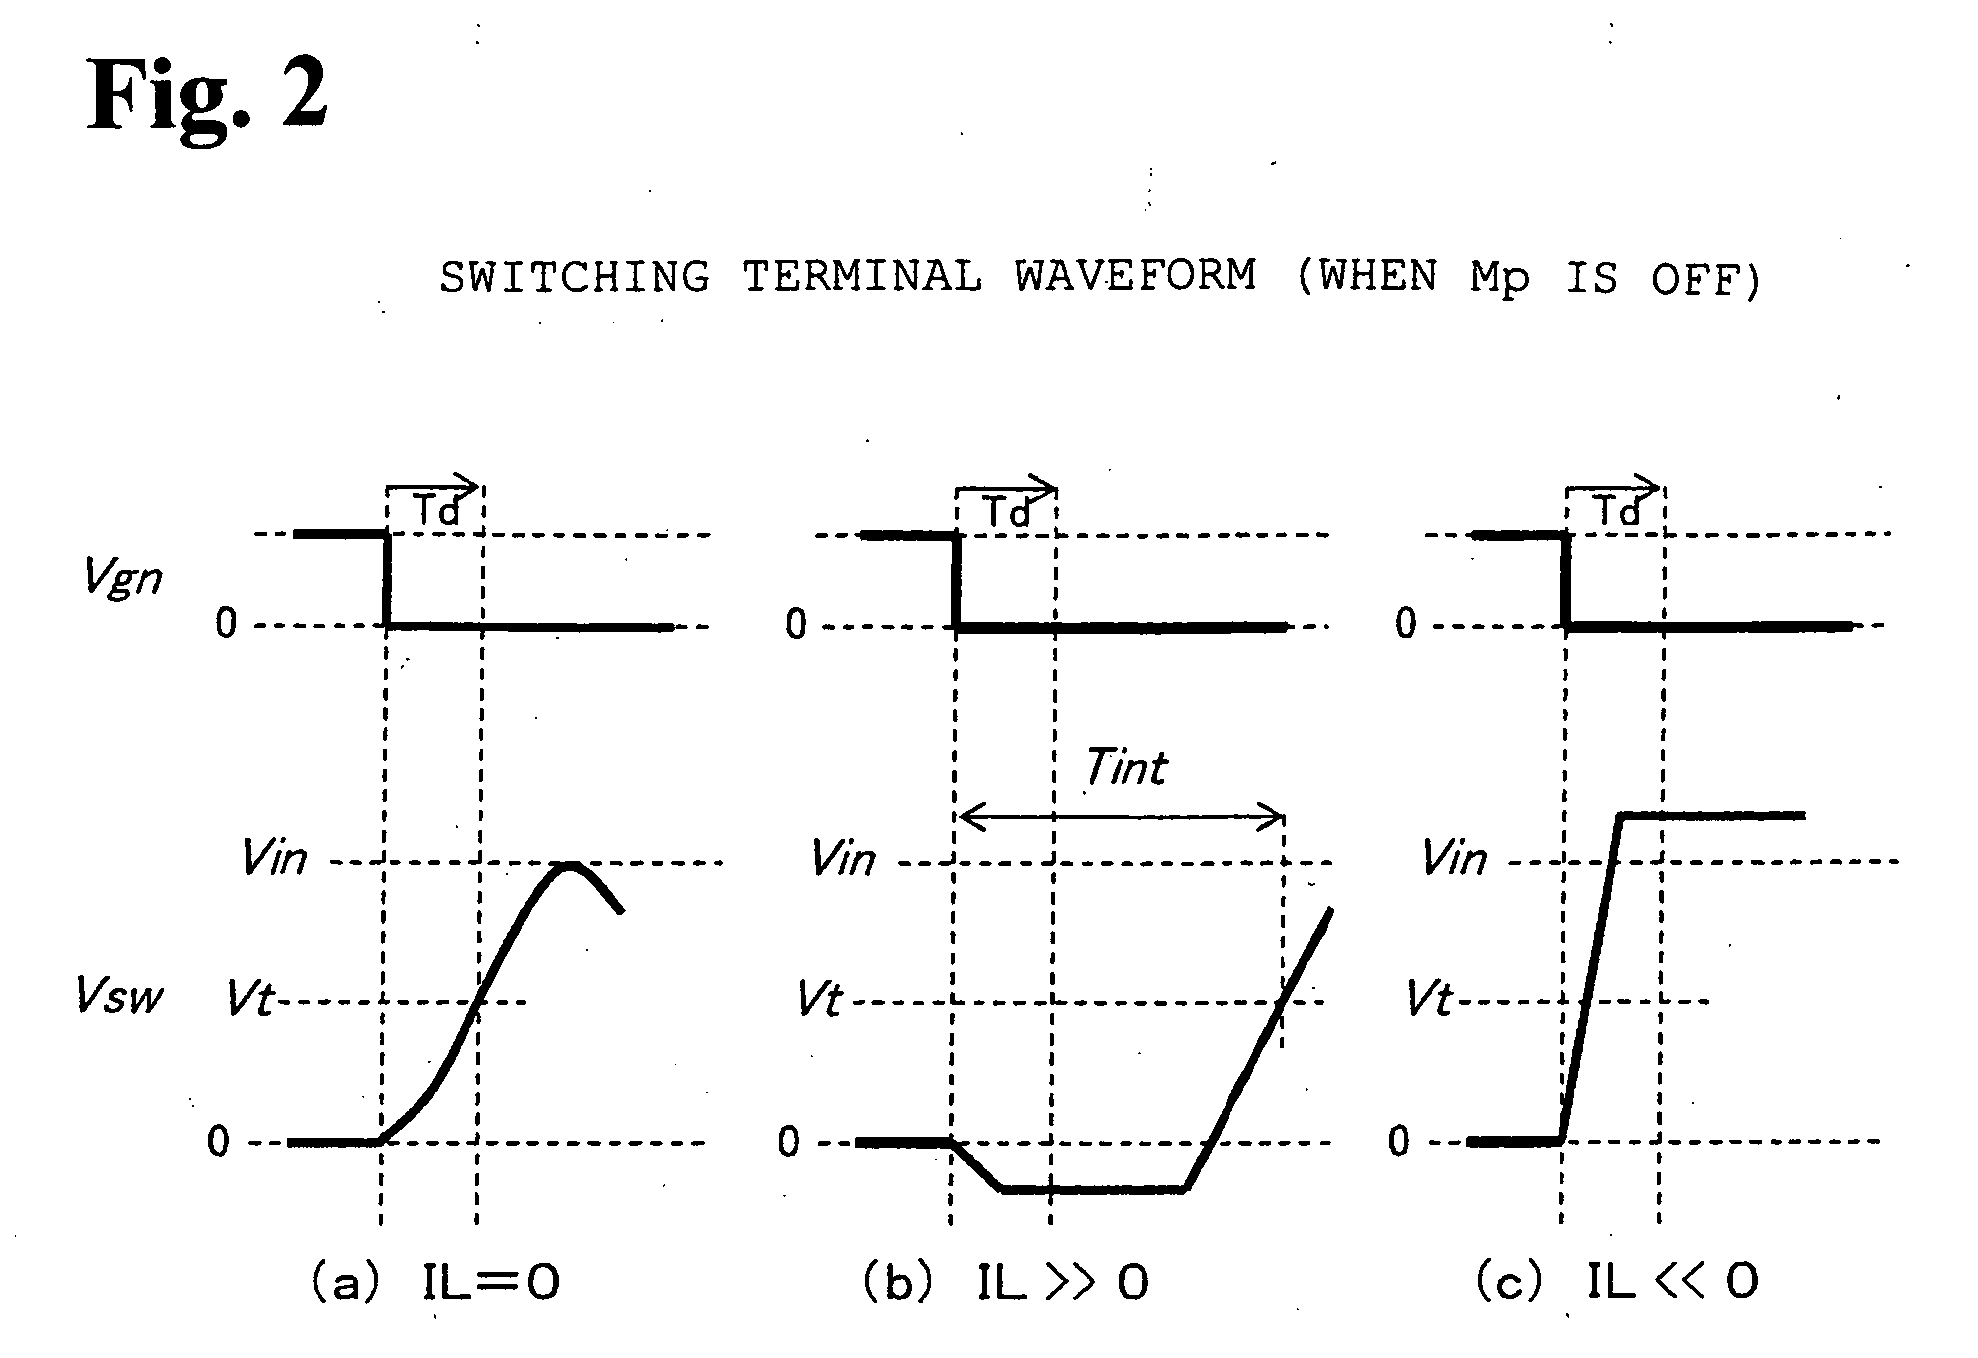 Reverse current stopping circuit of synchronous rectification type DC-DC Converter